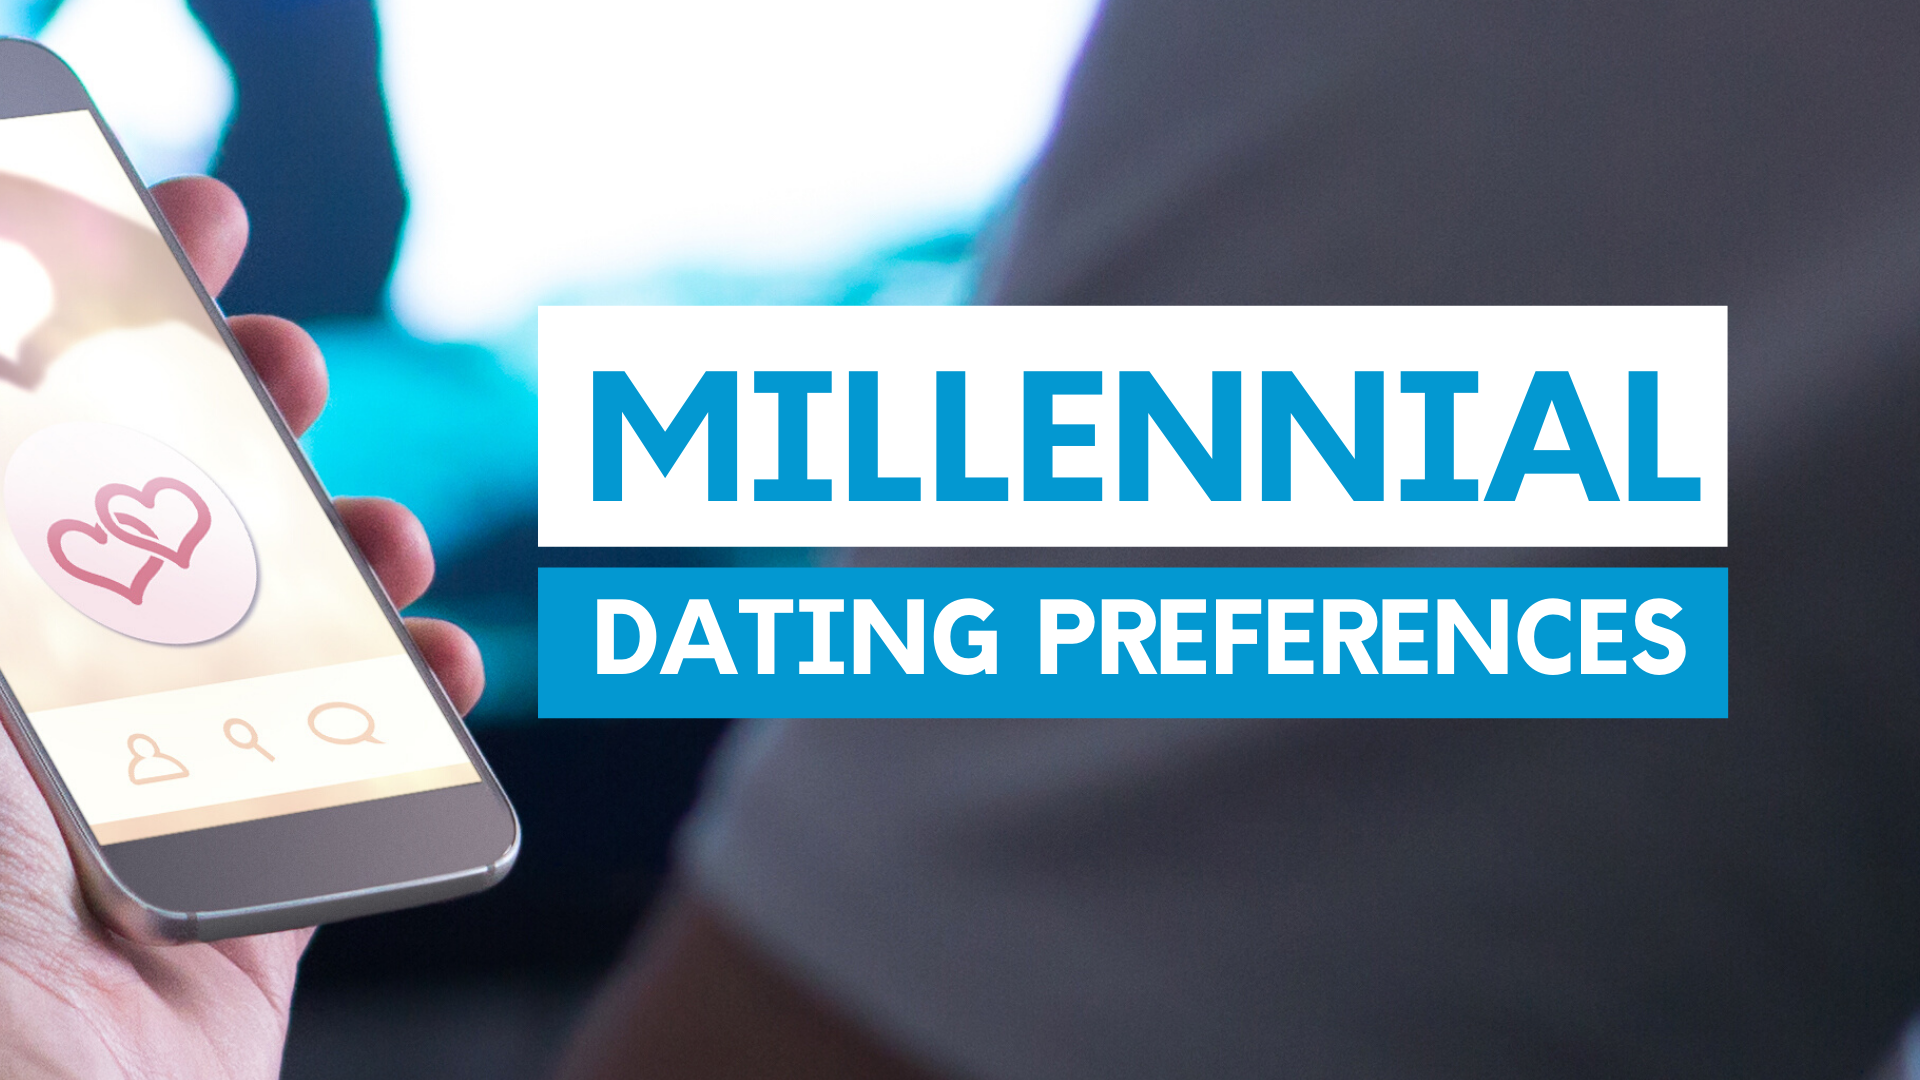 Millennial_Dating_Preferences_RFG